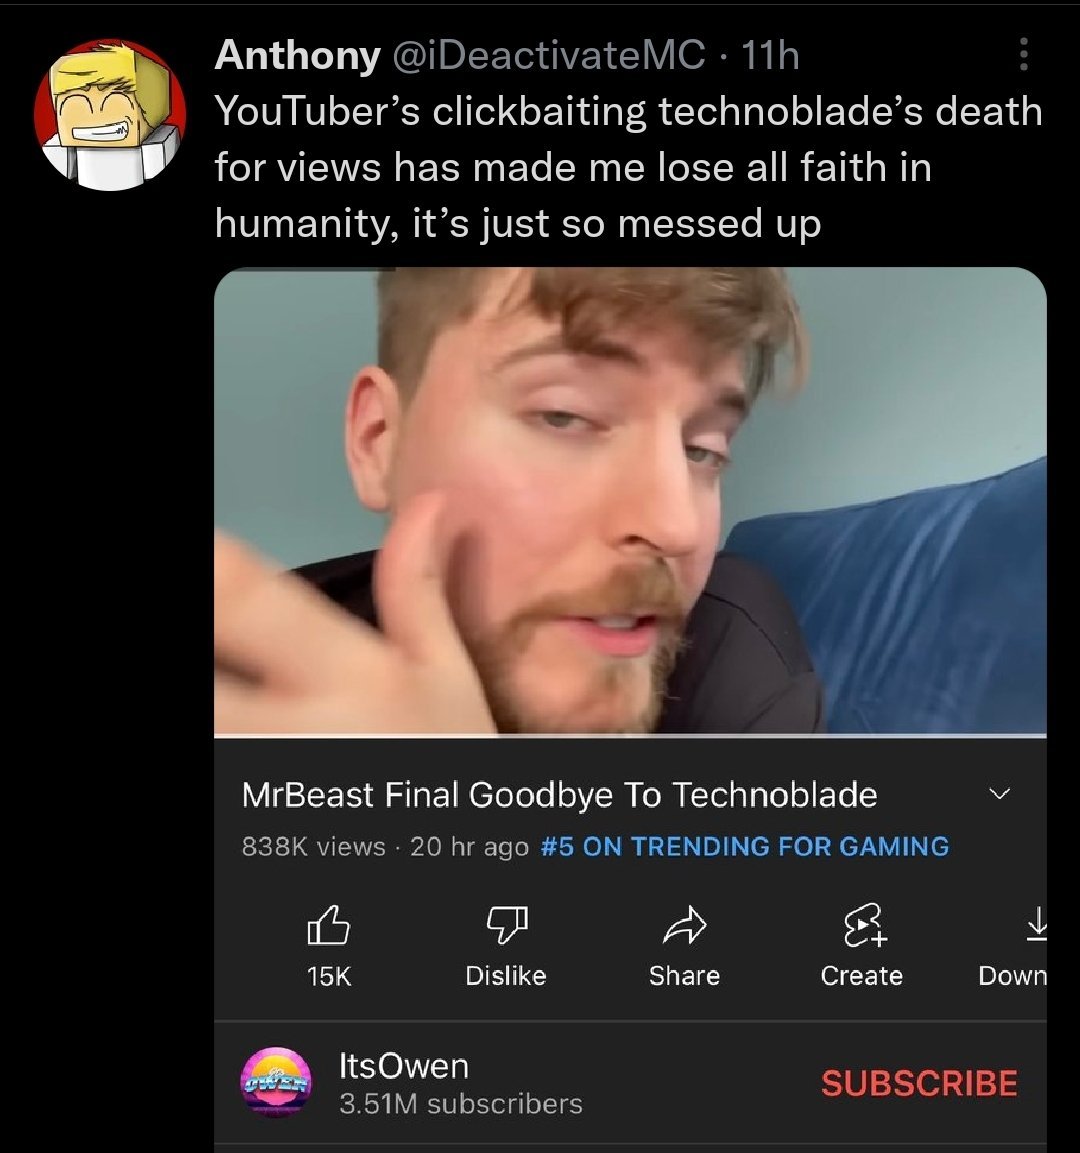 terminates channel for click-baiting Technoblade's death